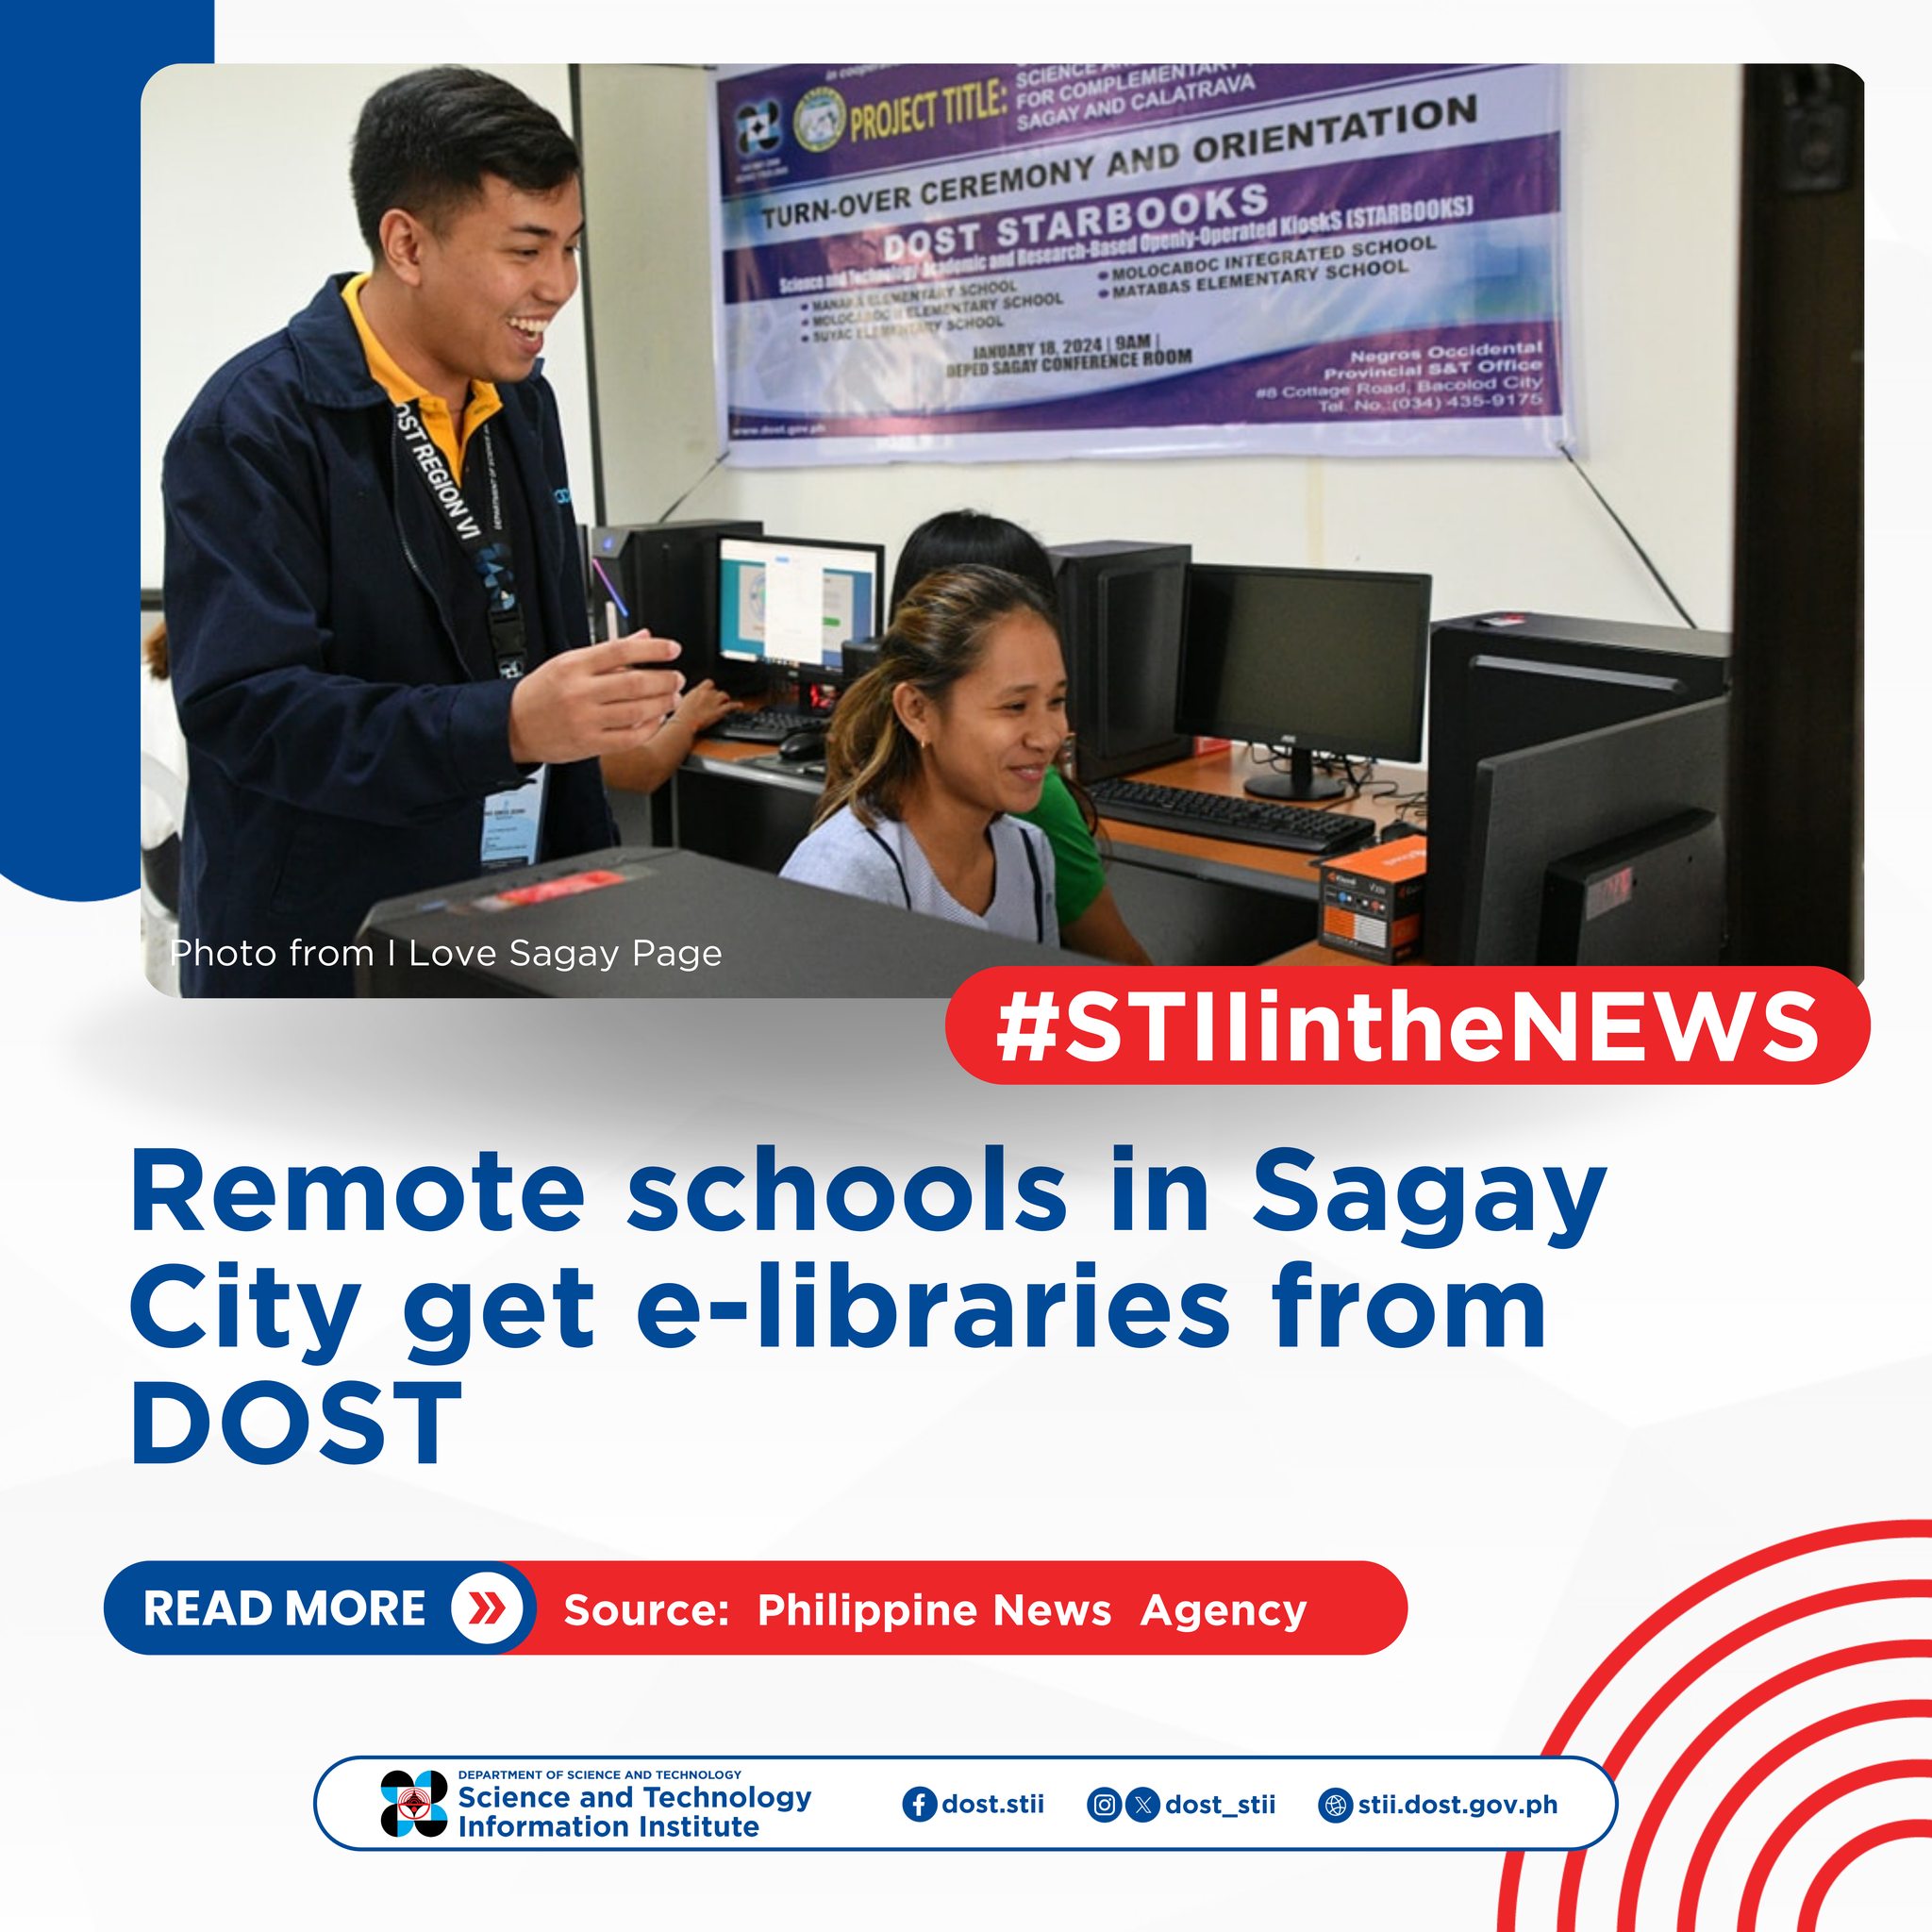 Remote schools in Sagay City get e-libraries from DOST